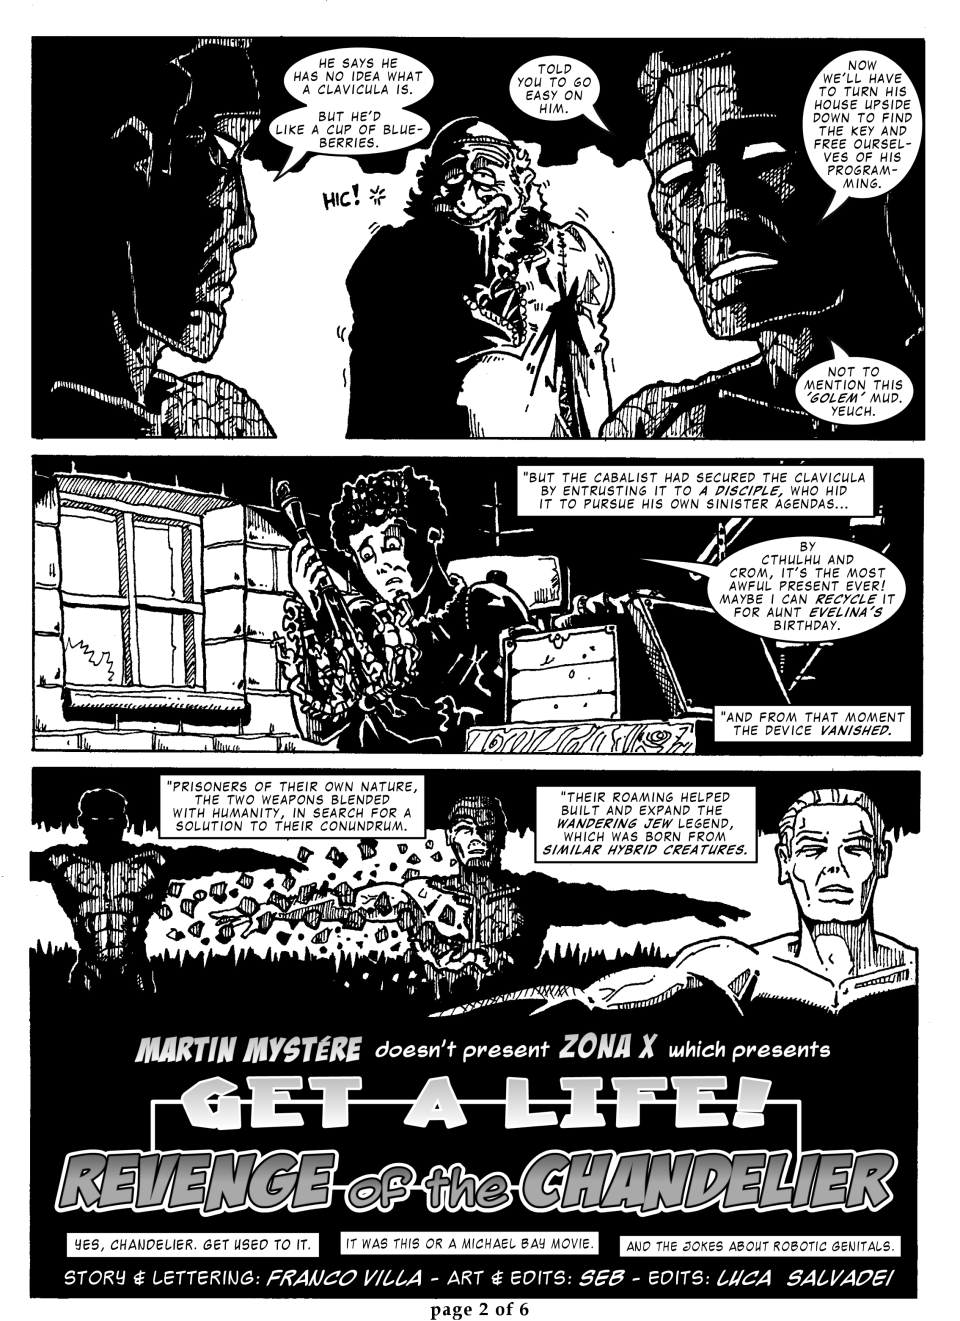 Get A Life 3 - page 2